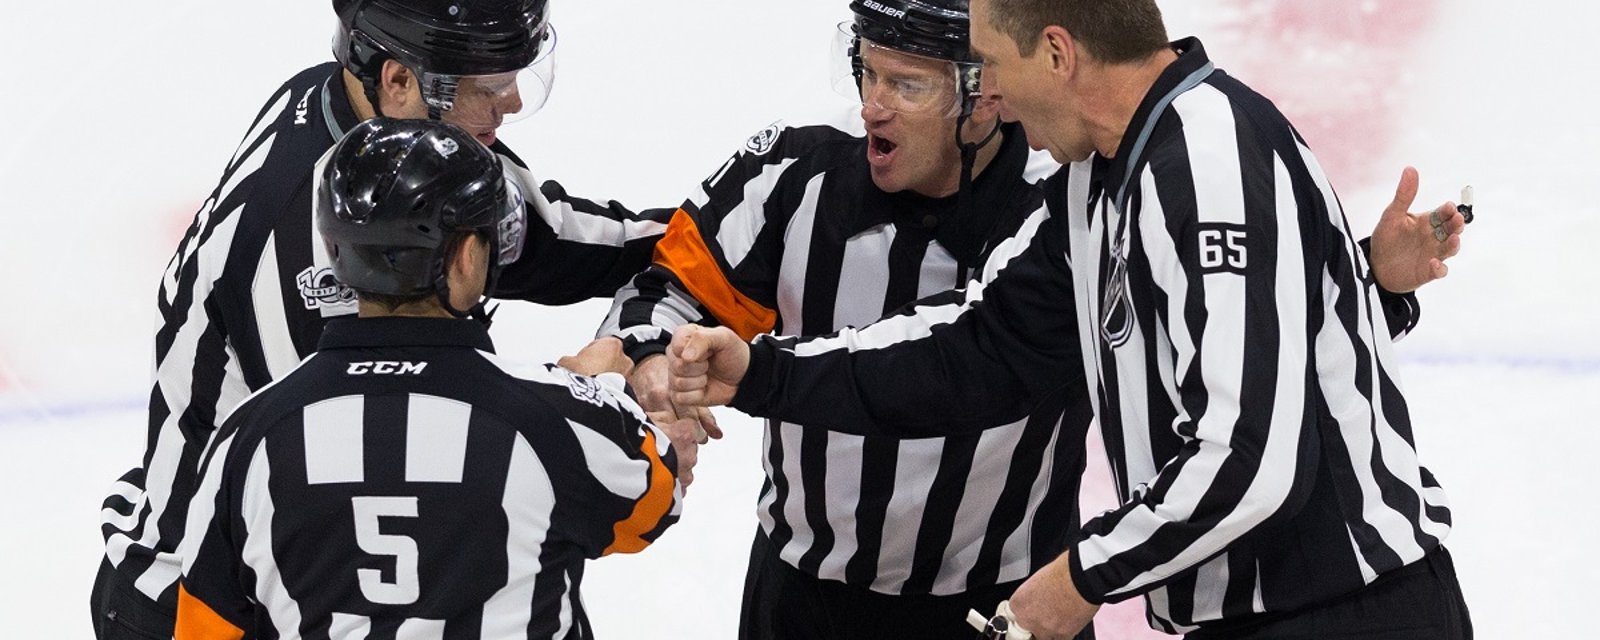 DJ Smith rips into the NHL's officials after a brutal game.